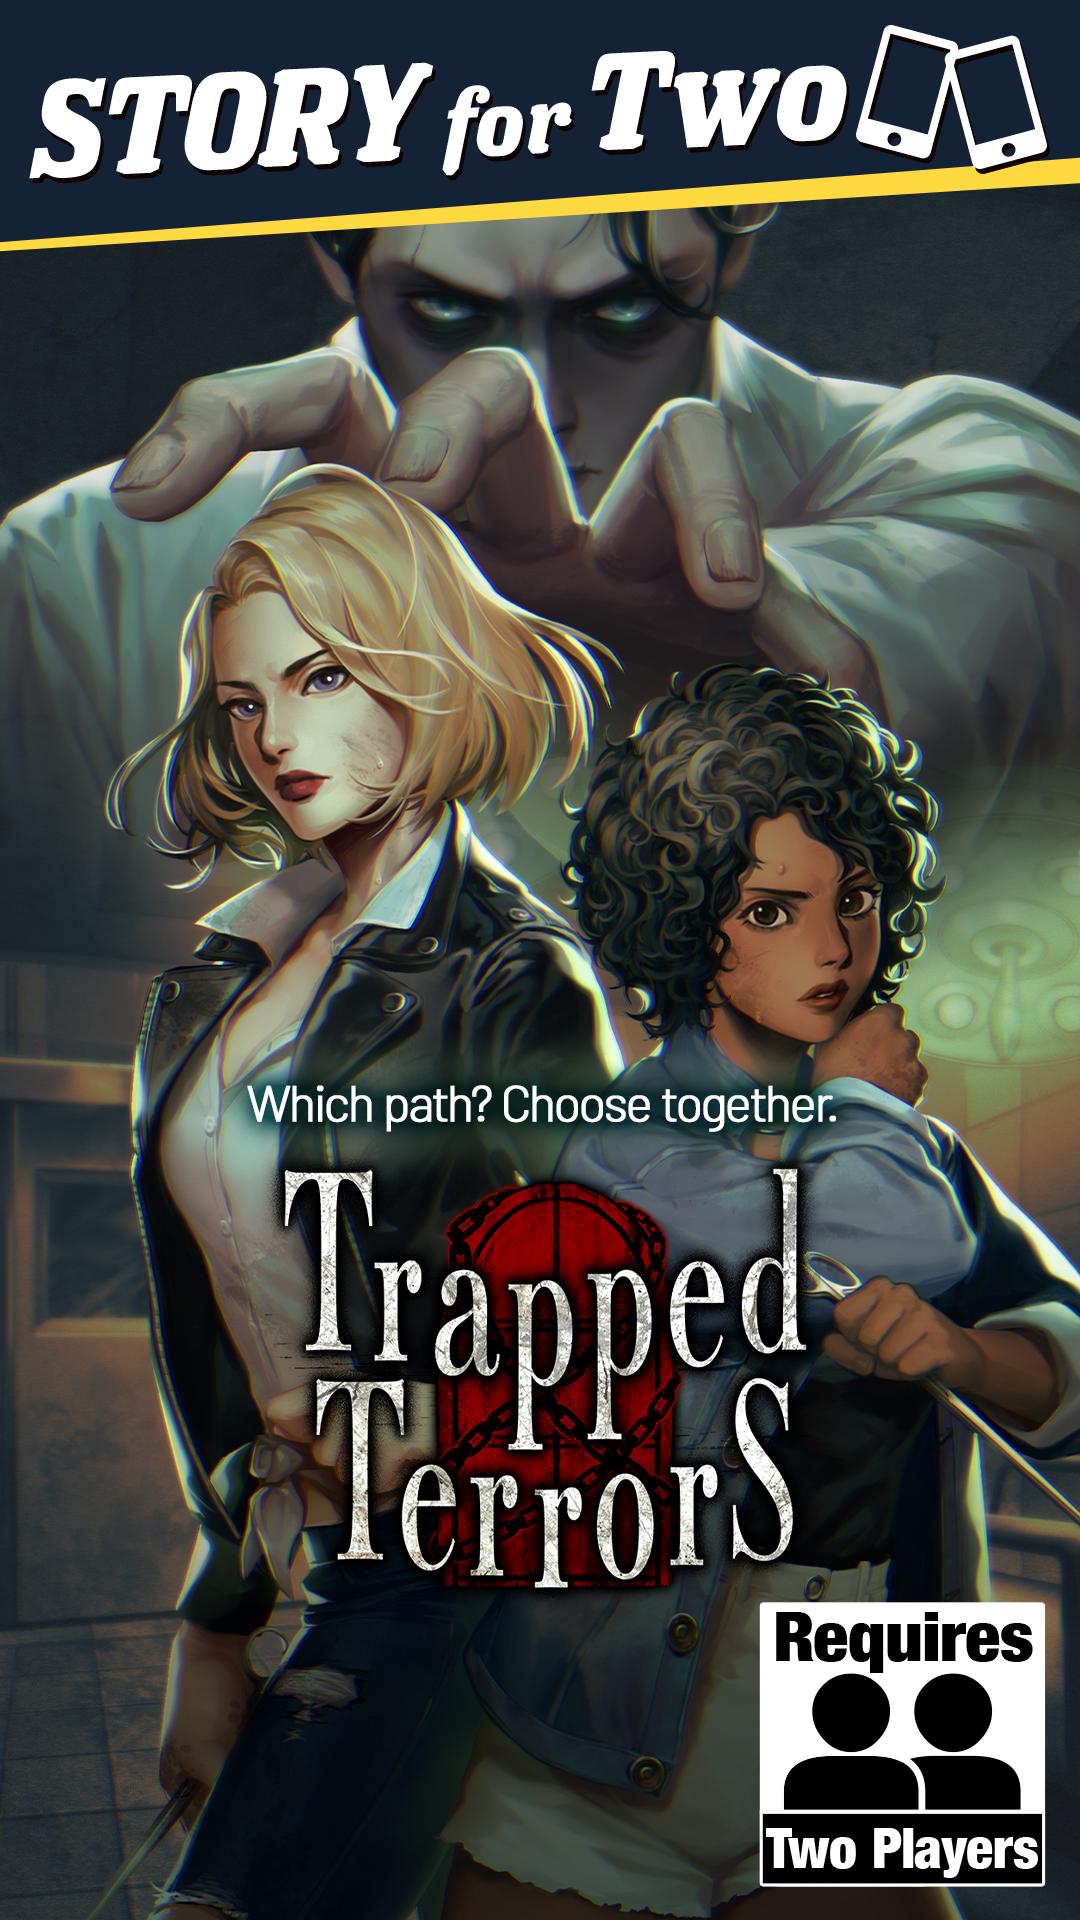 Trapped Terrors: A Story for Two 1.0.0 Screenshot 1